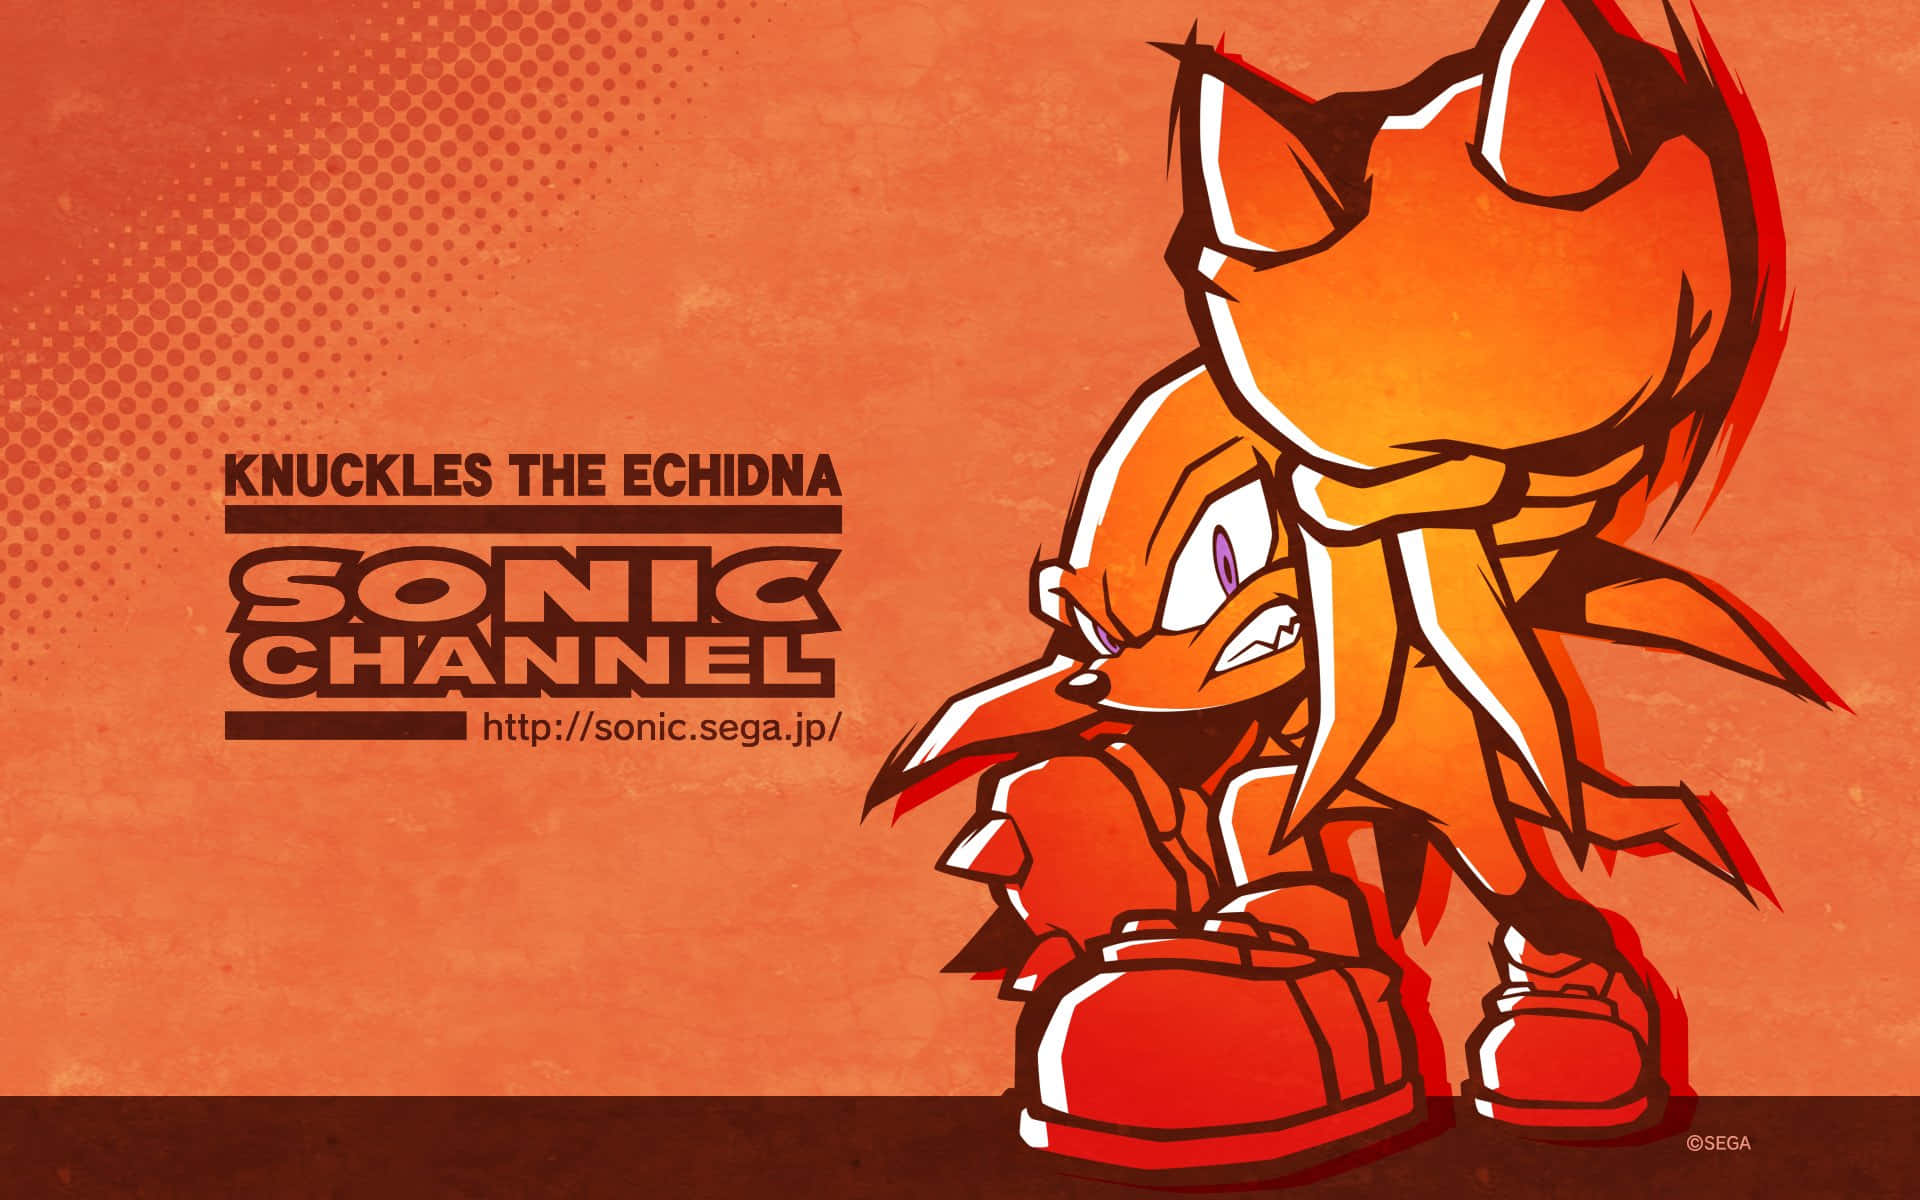 Sonic Channel - Kludge The Econoda Background